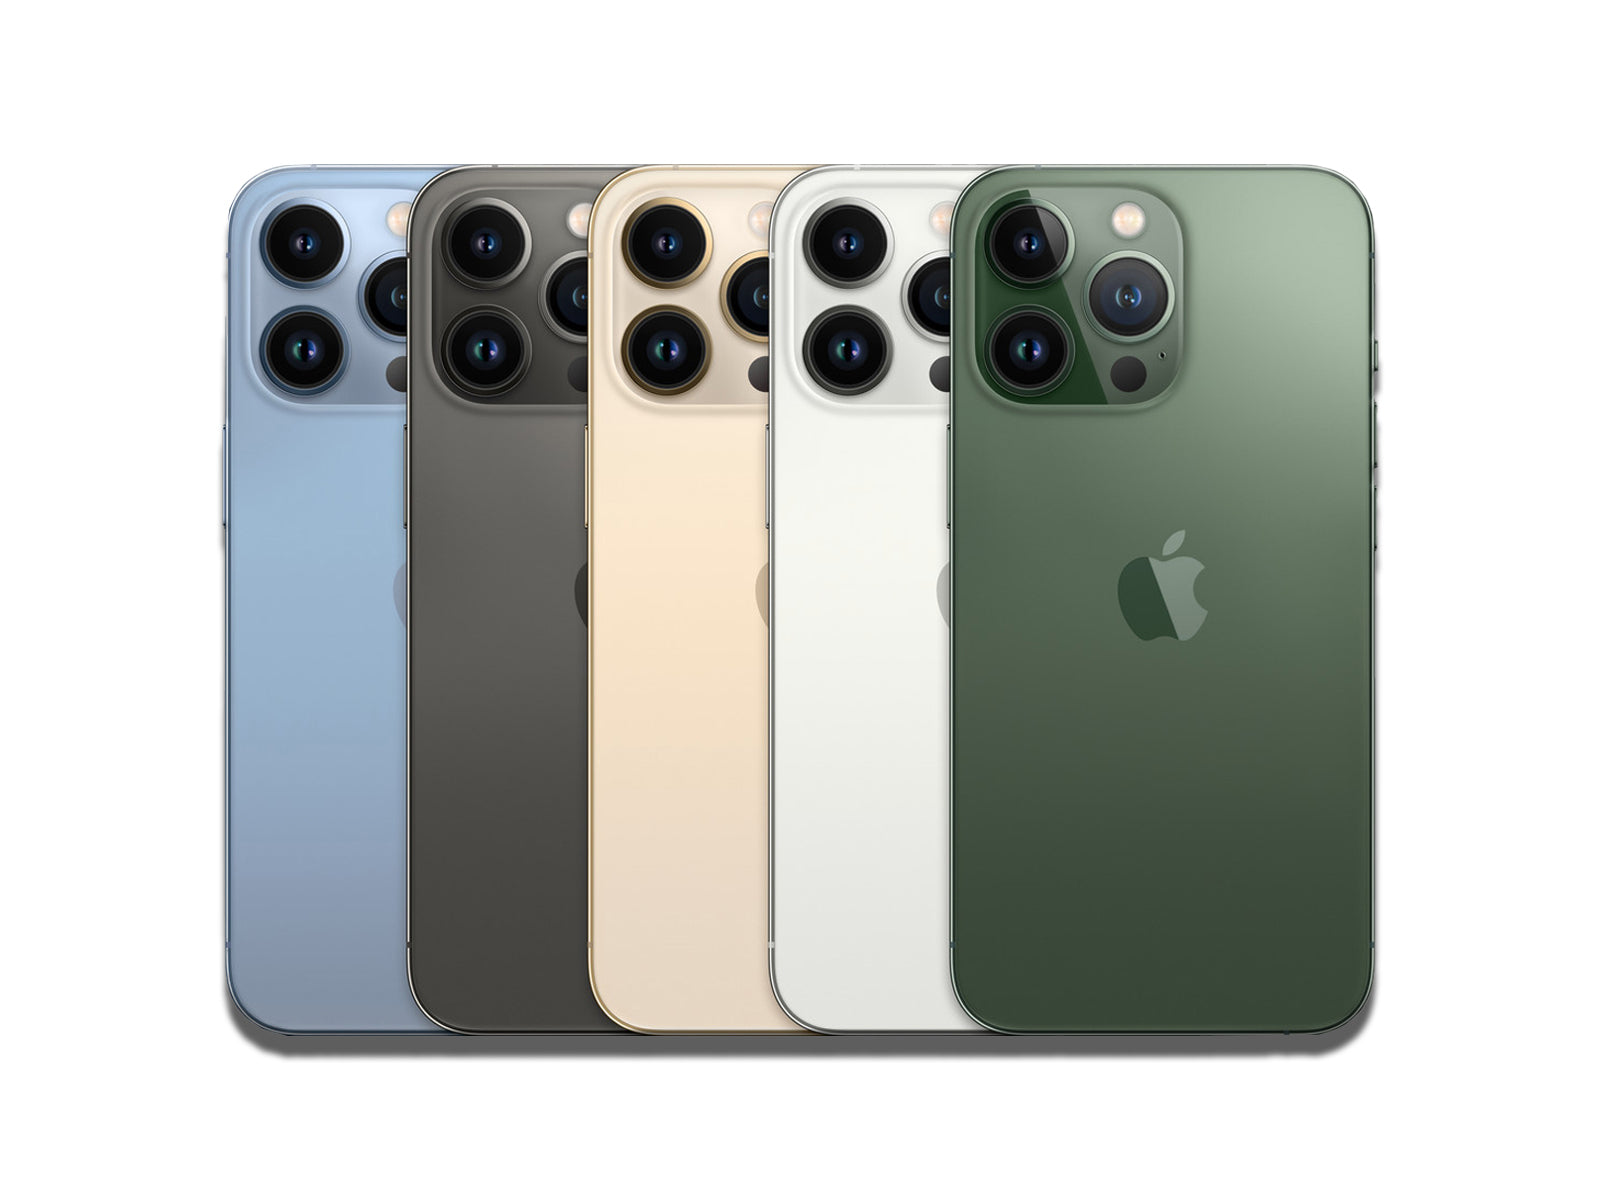 Image showing 5 different colour variants for Apple iPhone Pro 2021 on the white background]